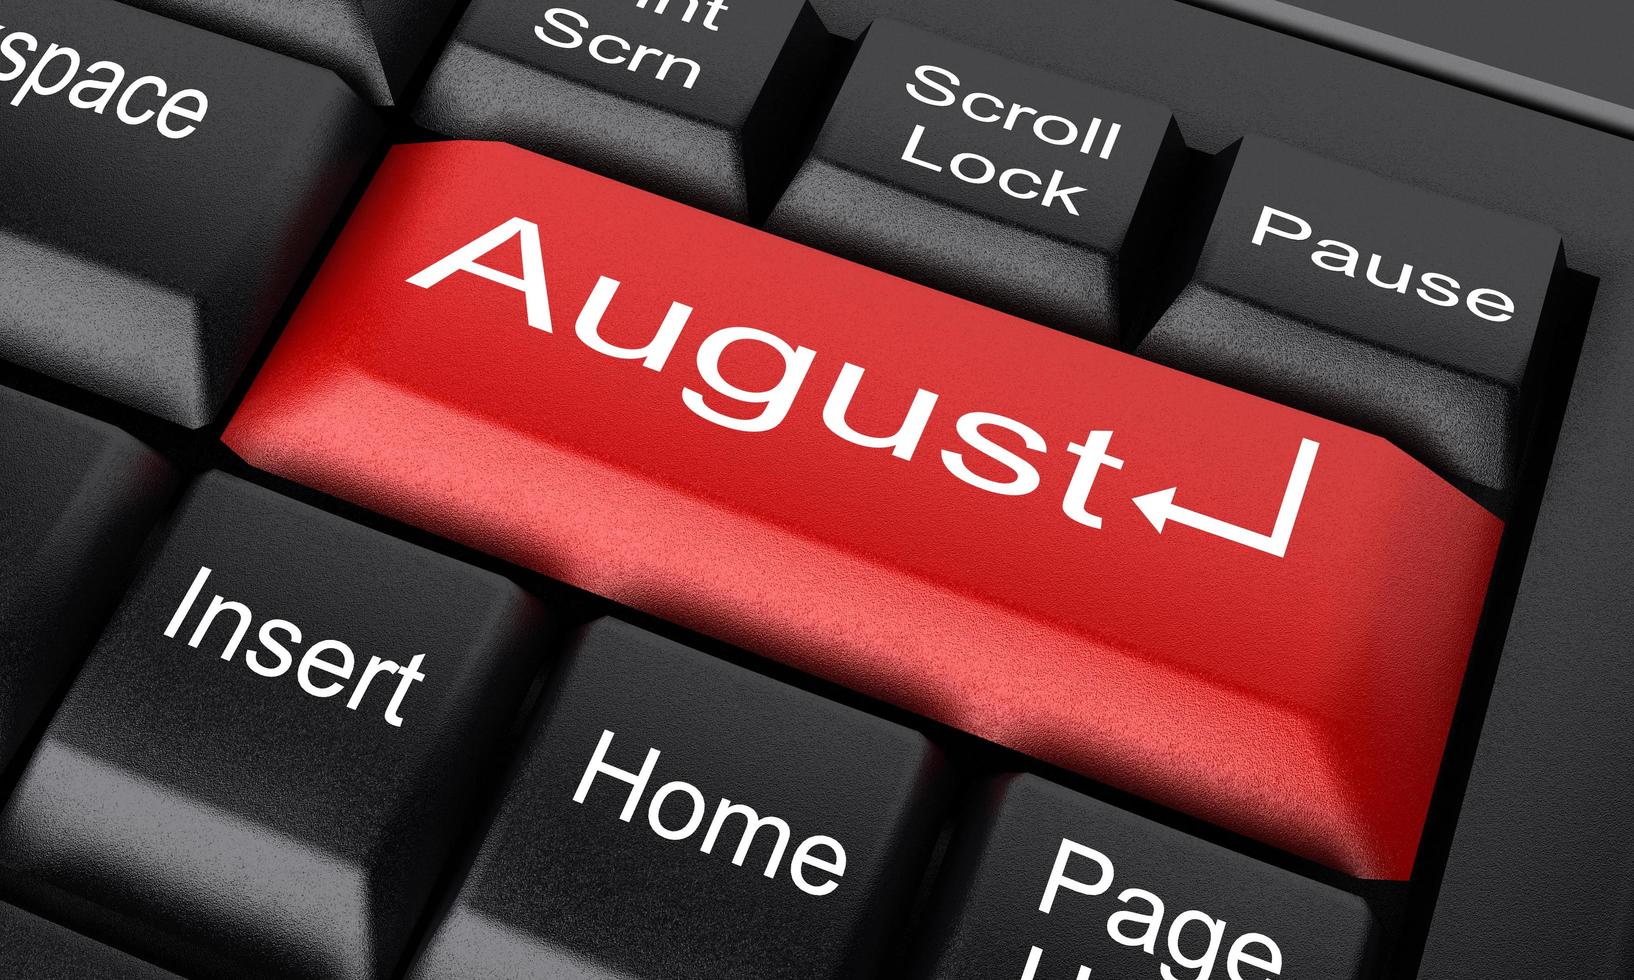 August word on red keyboard button photo